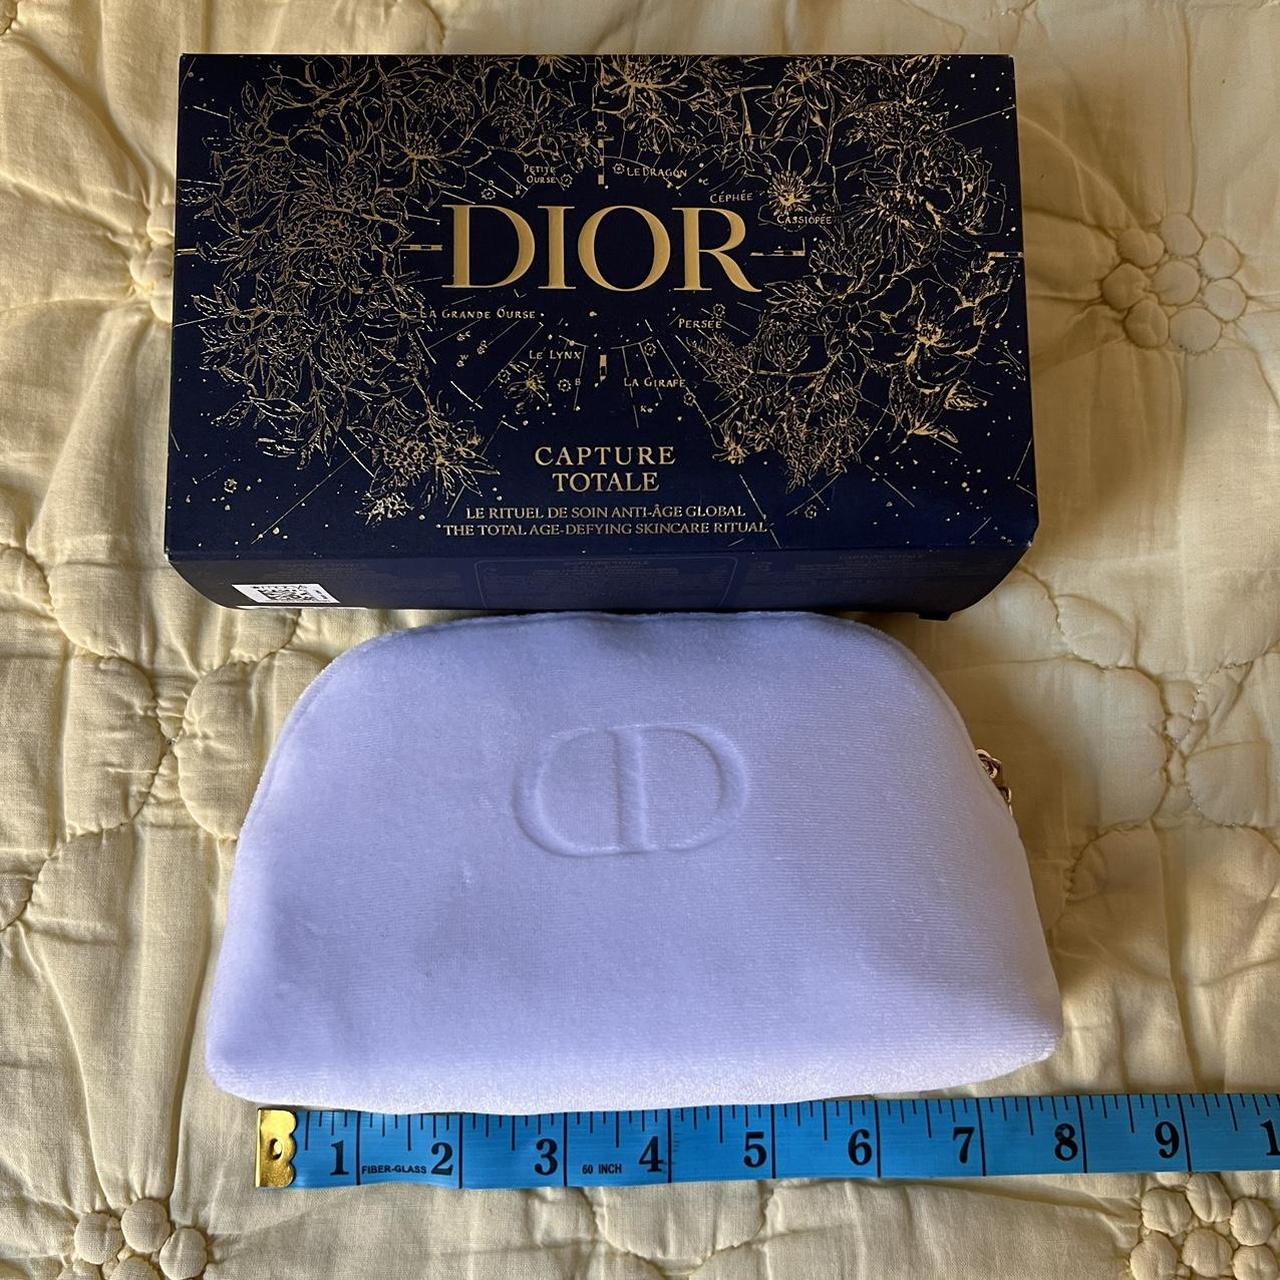 Dior Women's White and Gold Bag (6)